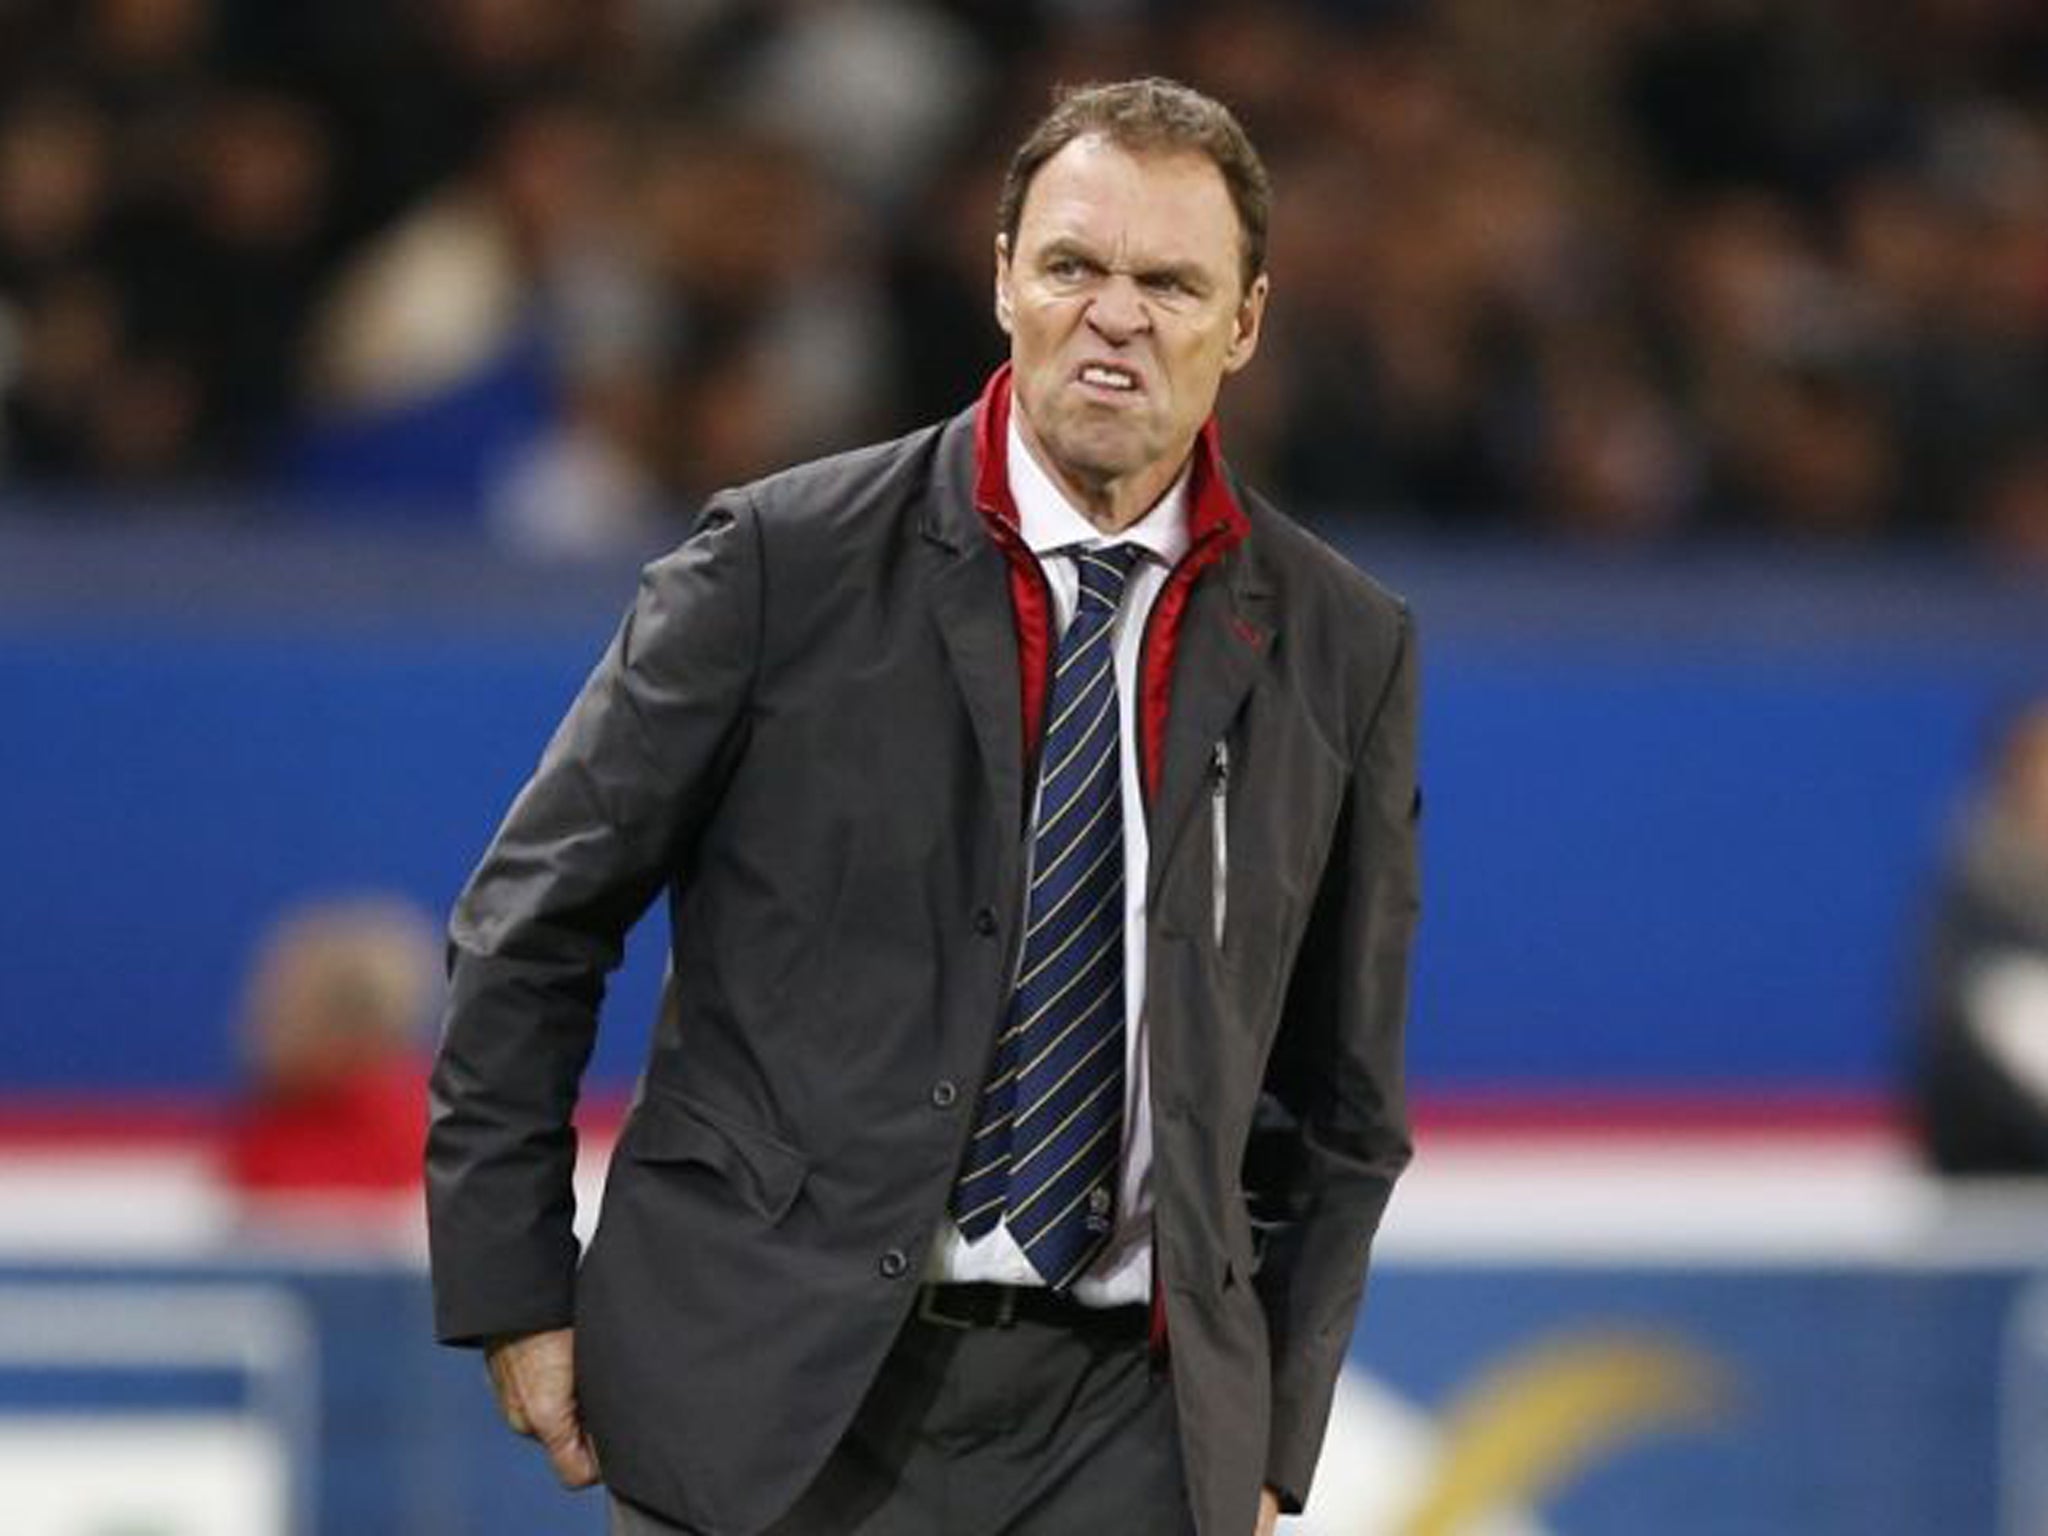 Australia coach Holger Osieck was fired after a second successive 6-0 defeat